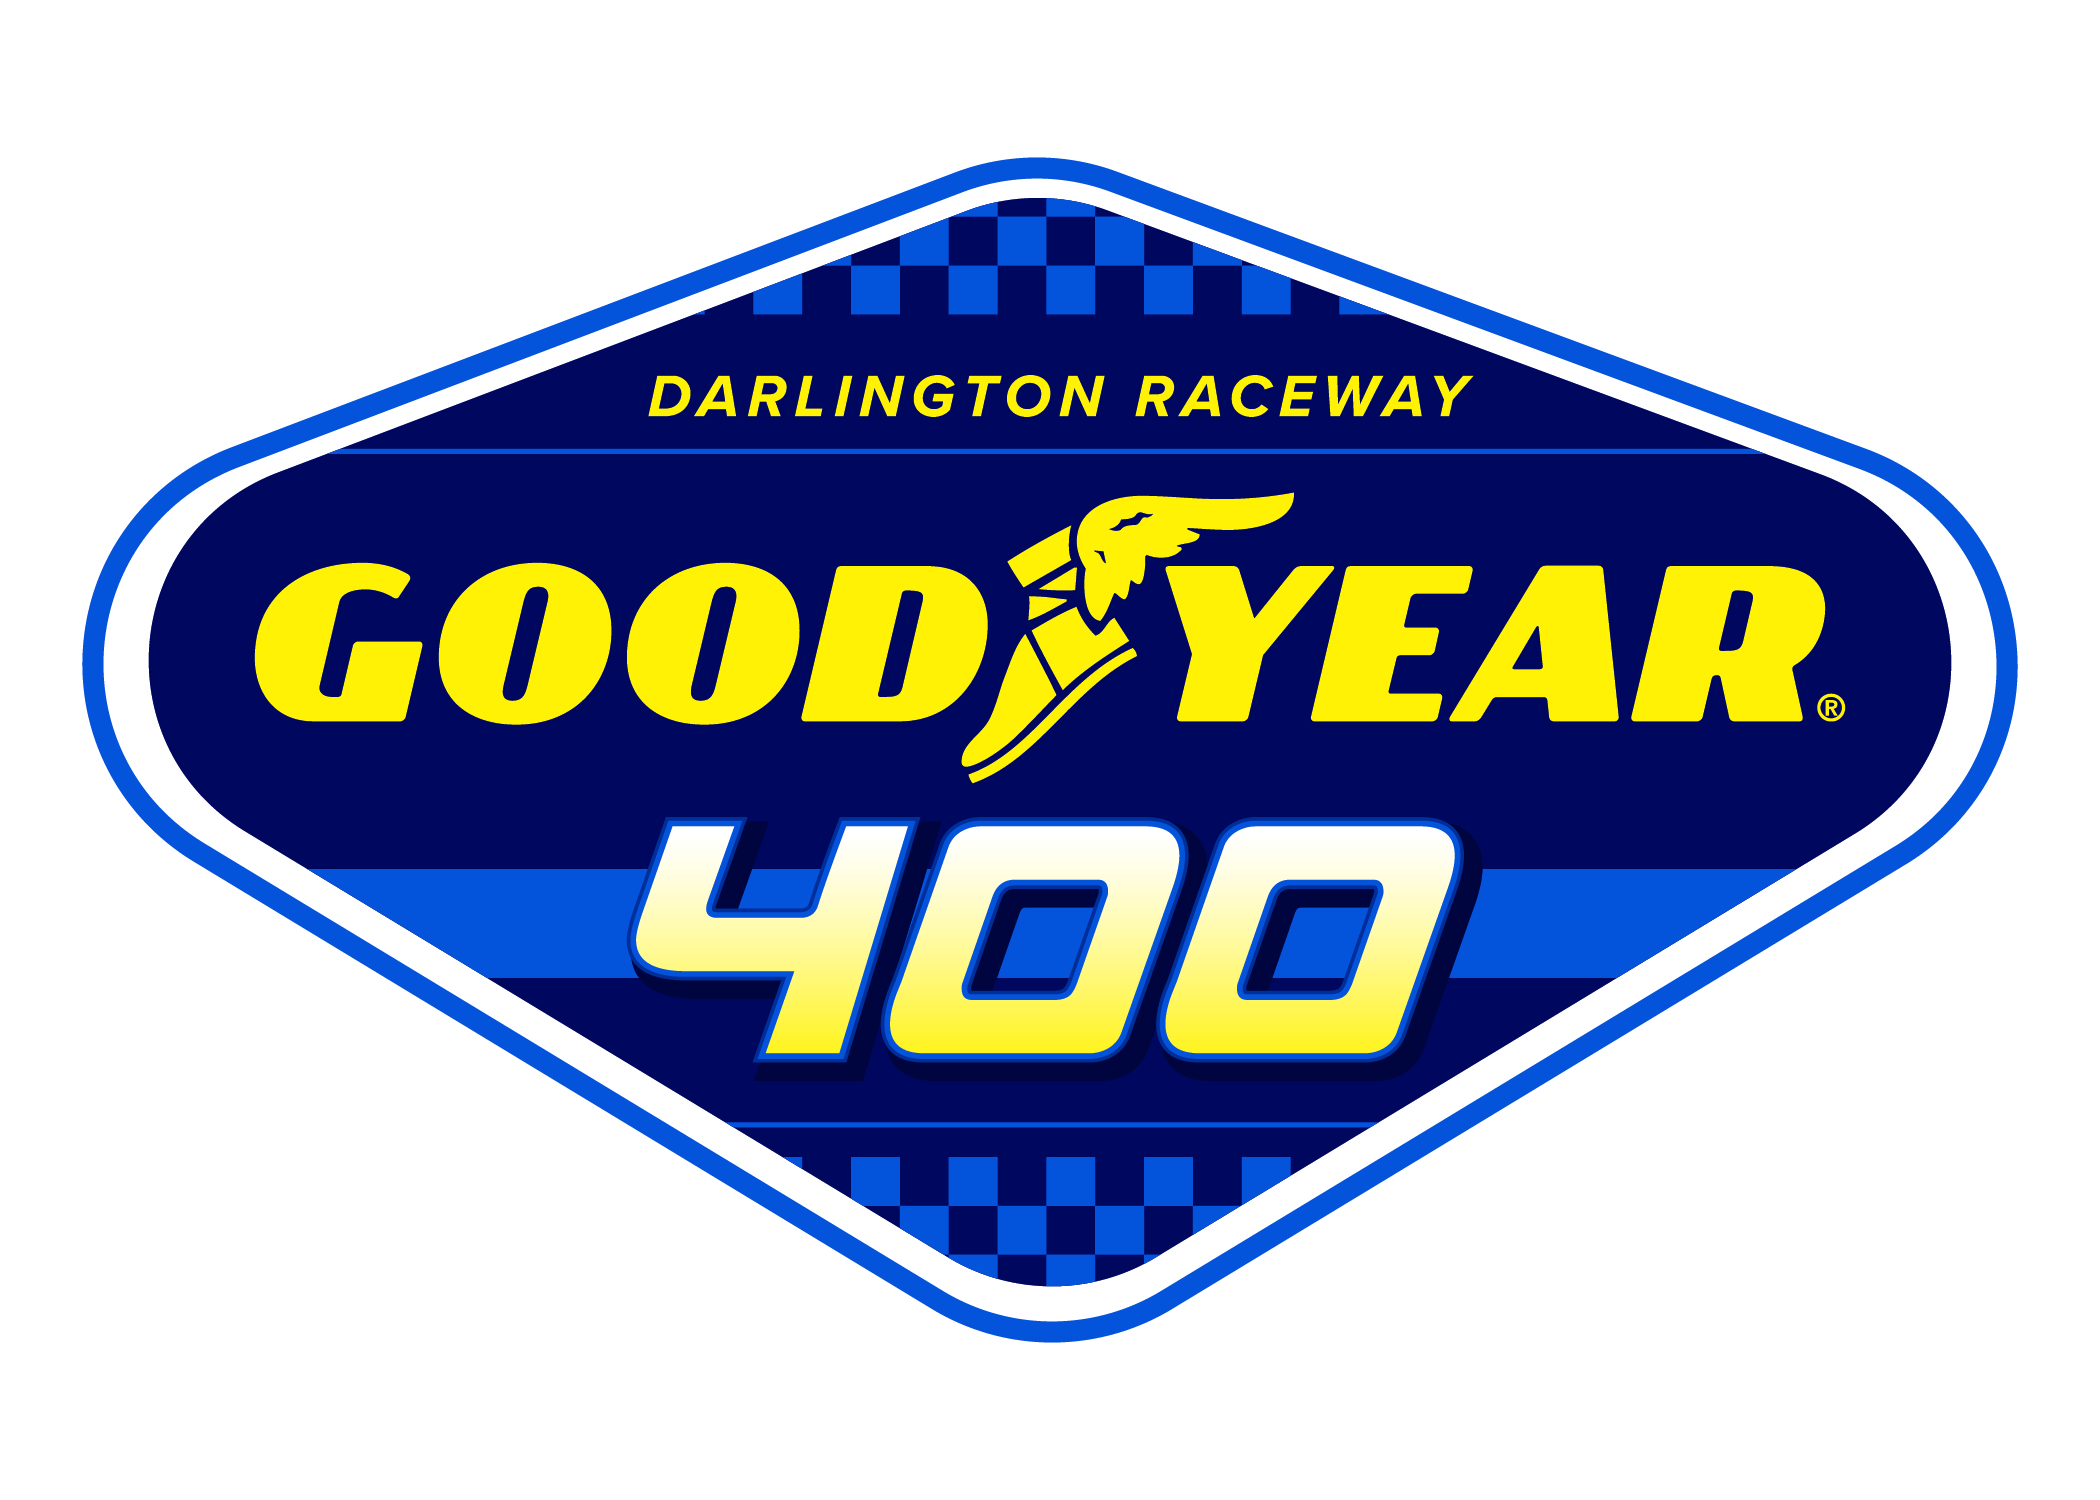 CHEVY NCS AT DARLINGTON: Post-Race Notes and Quotes